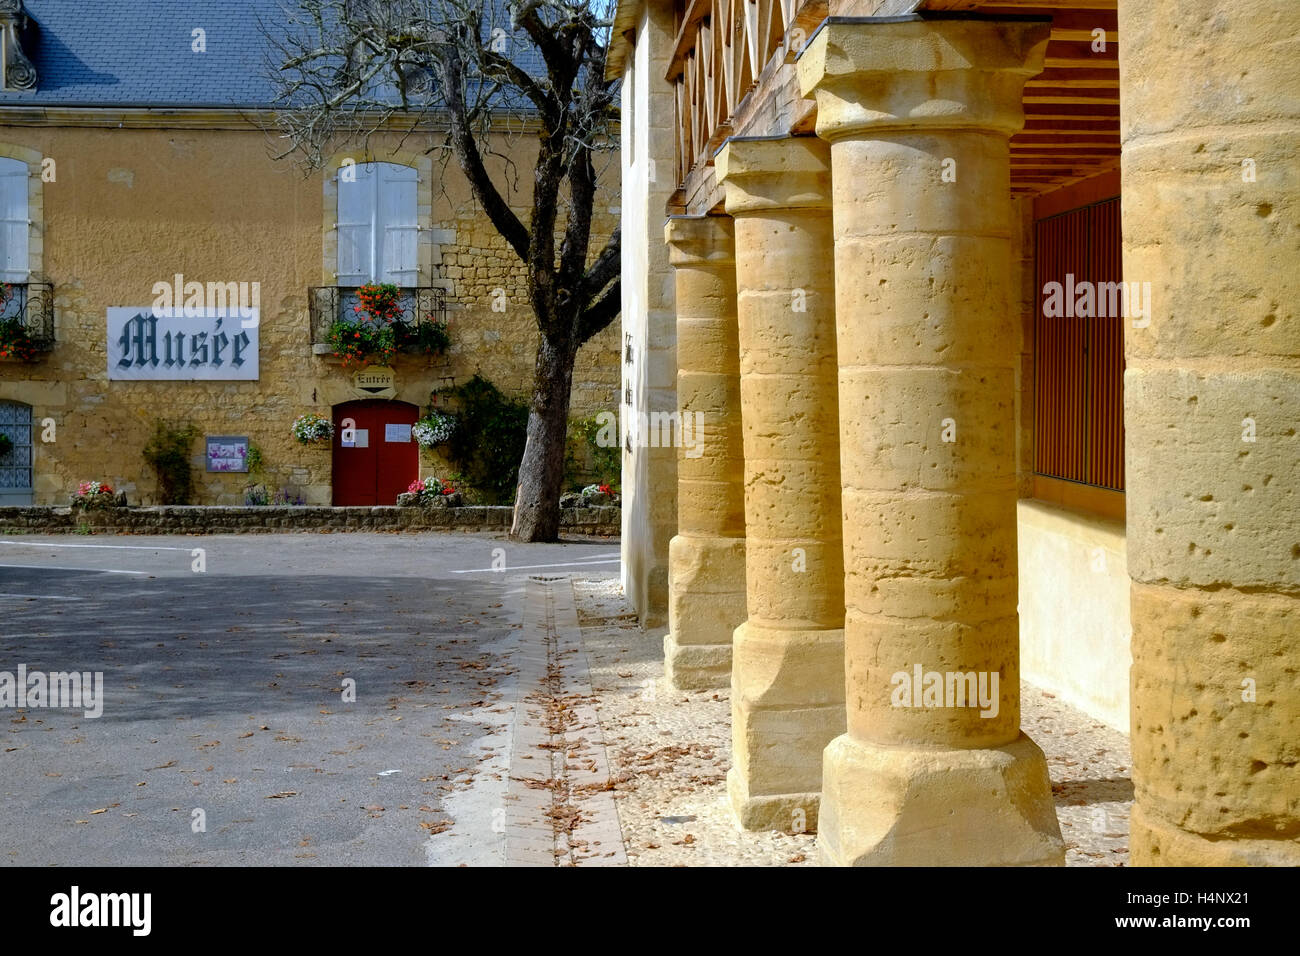 A picturesque street scene in autumn sunshine, the museum closes at lunchtime, Domme, Aquitane, France Stock Photo